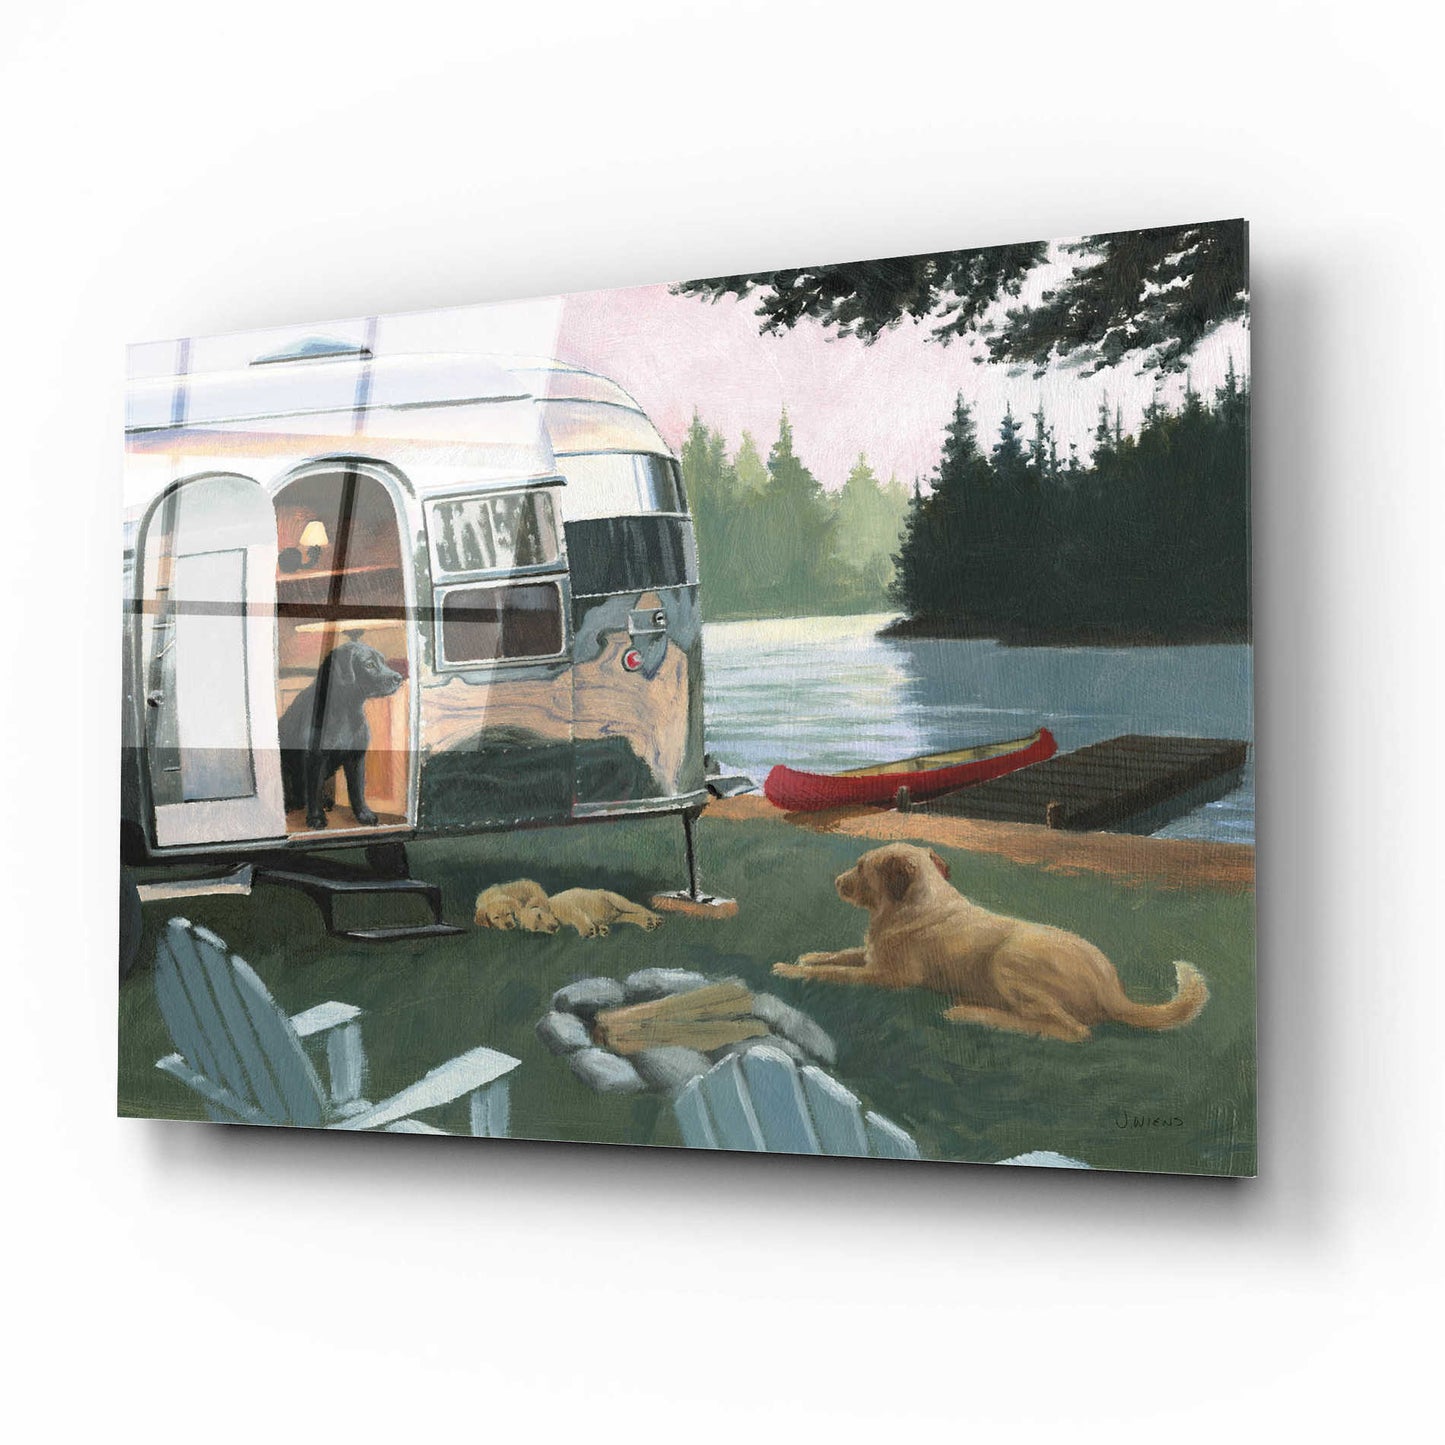 Epic Art 'Canine Camp' by James Wiens, Acrylic Glass Wall Art,16x12